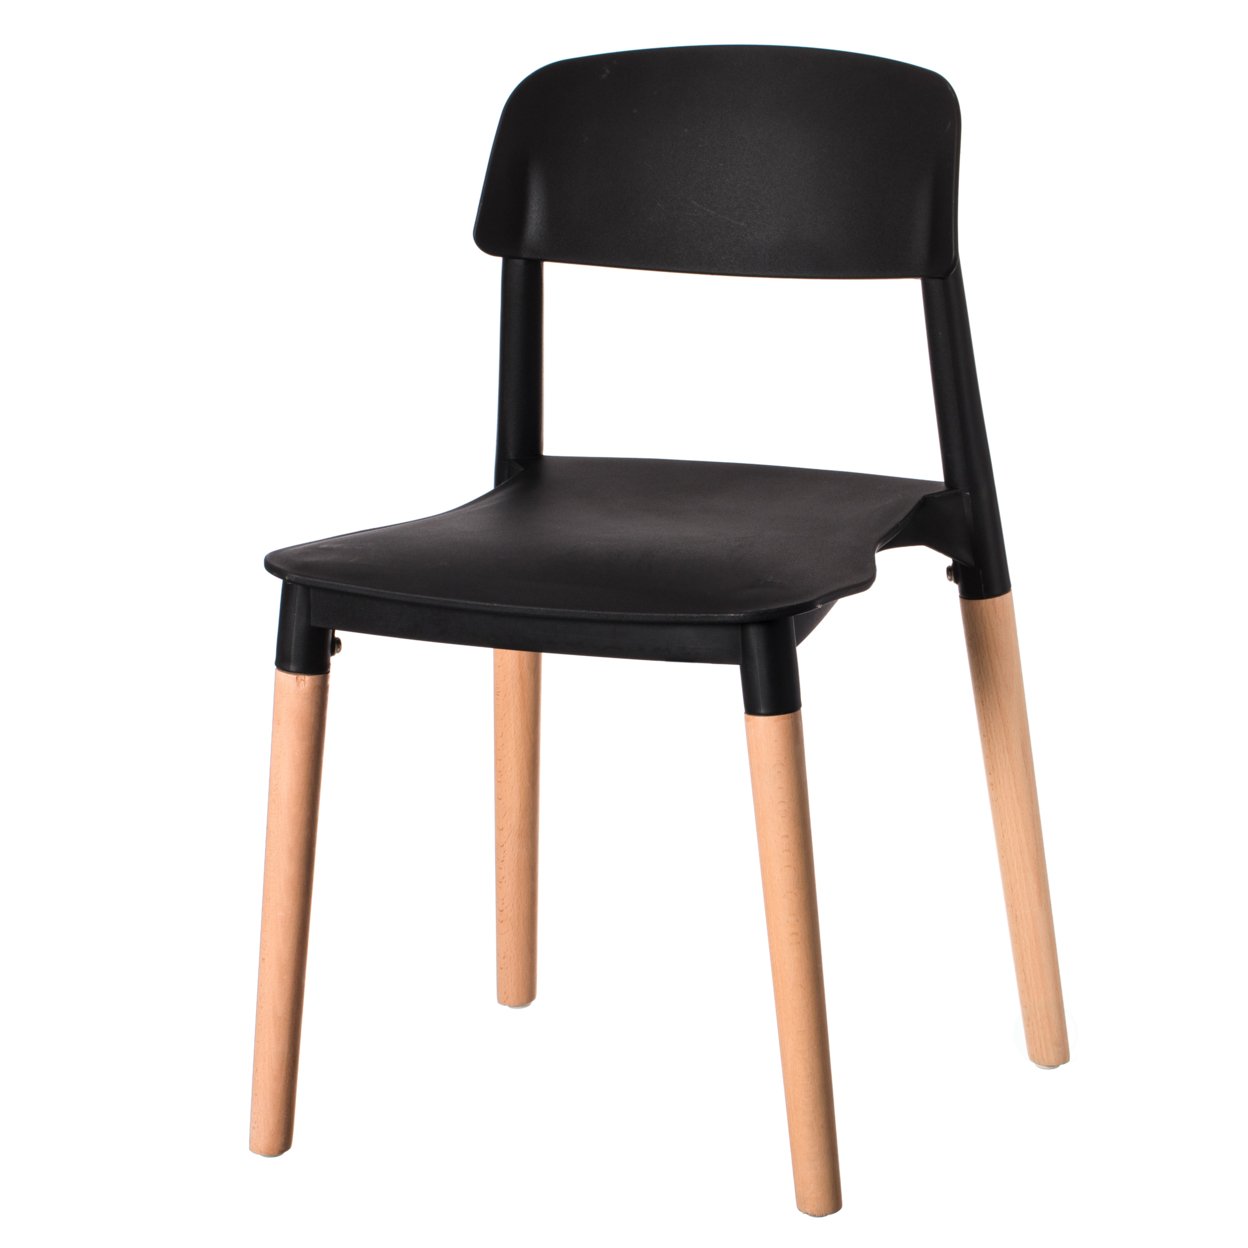 Modern Plastic Dining Chair Open Back With Beech Wood Legs - Single Red